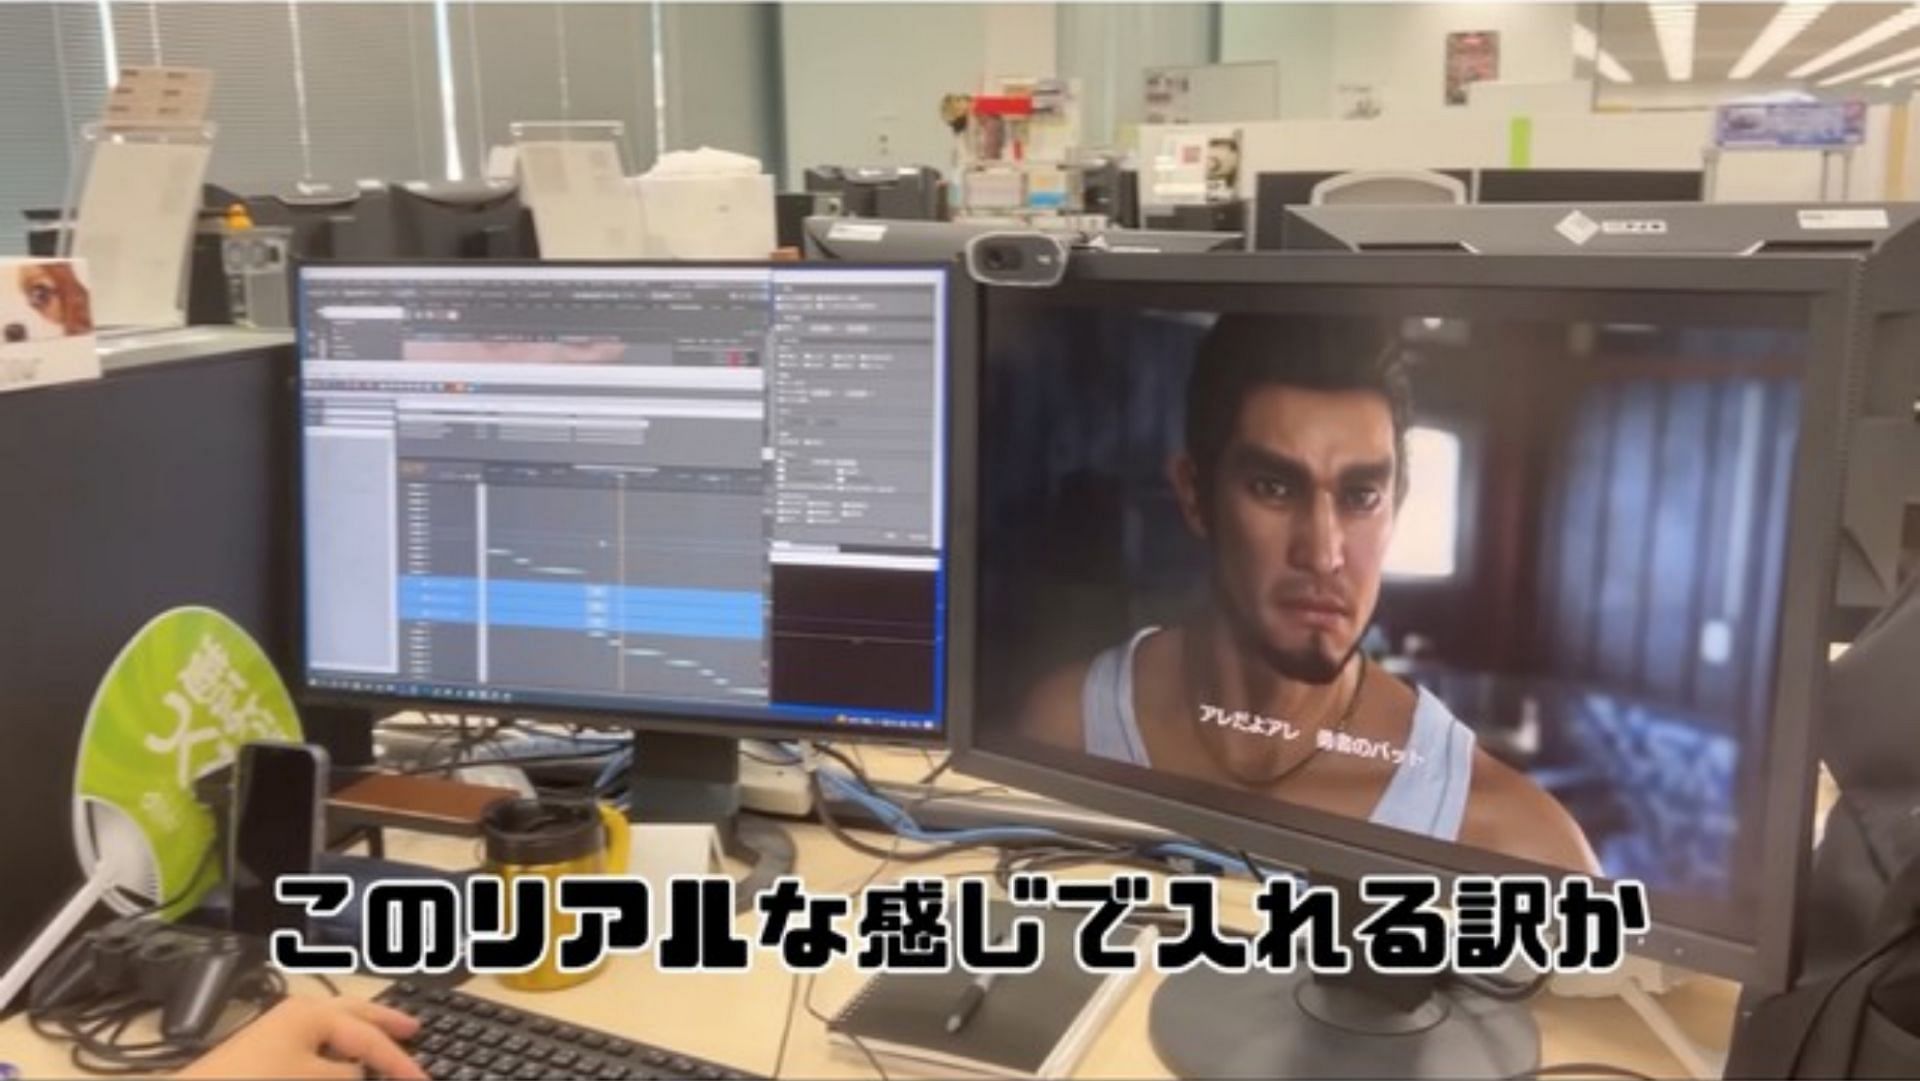 Kasuga Ichiban can be seen in the YouTube video, only without his afro (Image via Mikuru Asakura/YouTube)